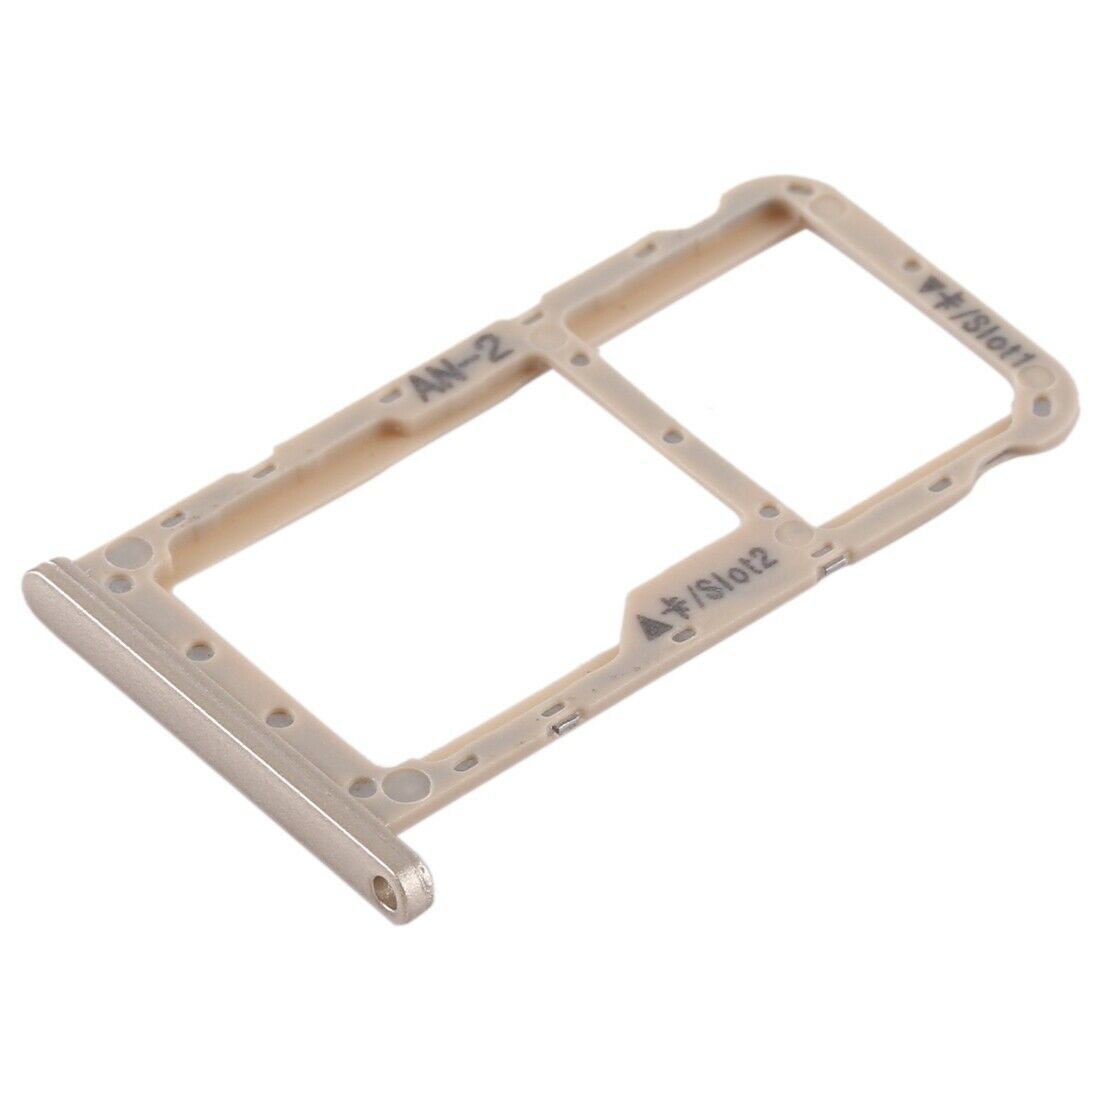 Huawei P20 Lite - Dual SIM Card Holder Tray Slot Gold for [product_price] - First Help Tech